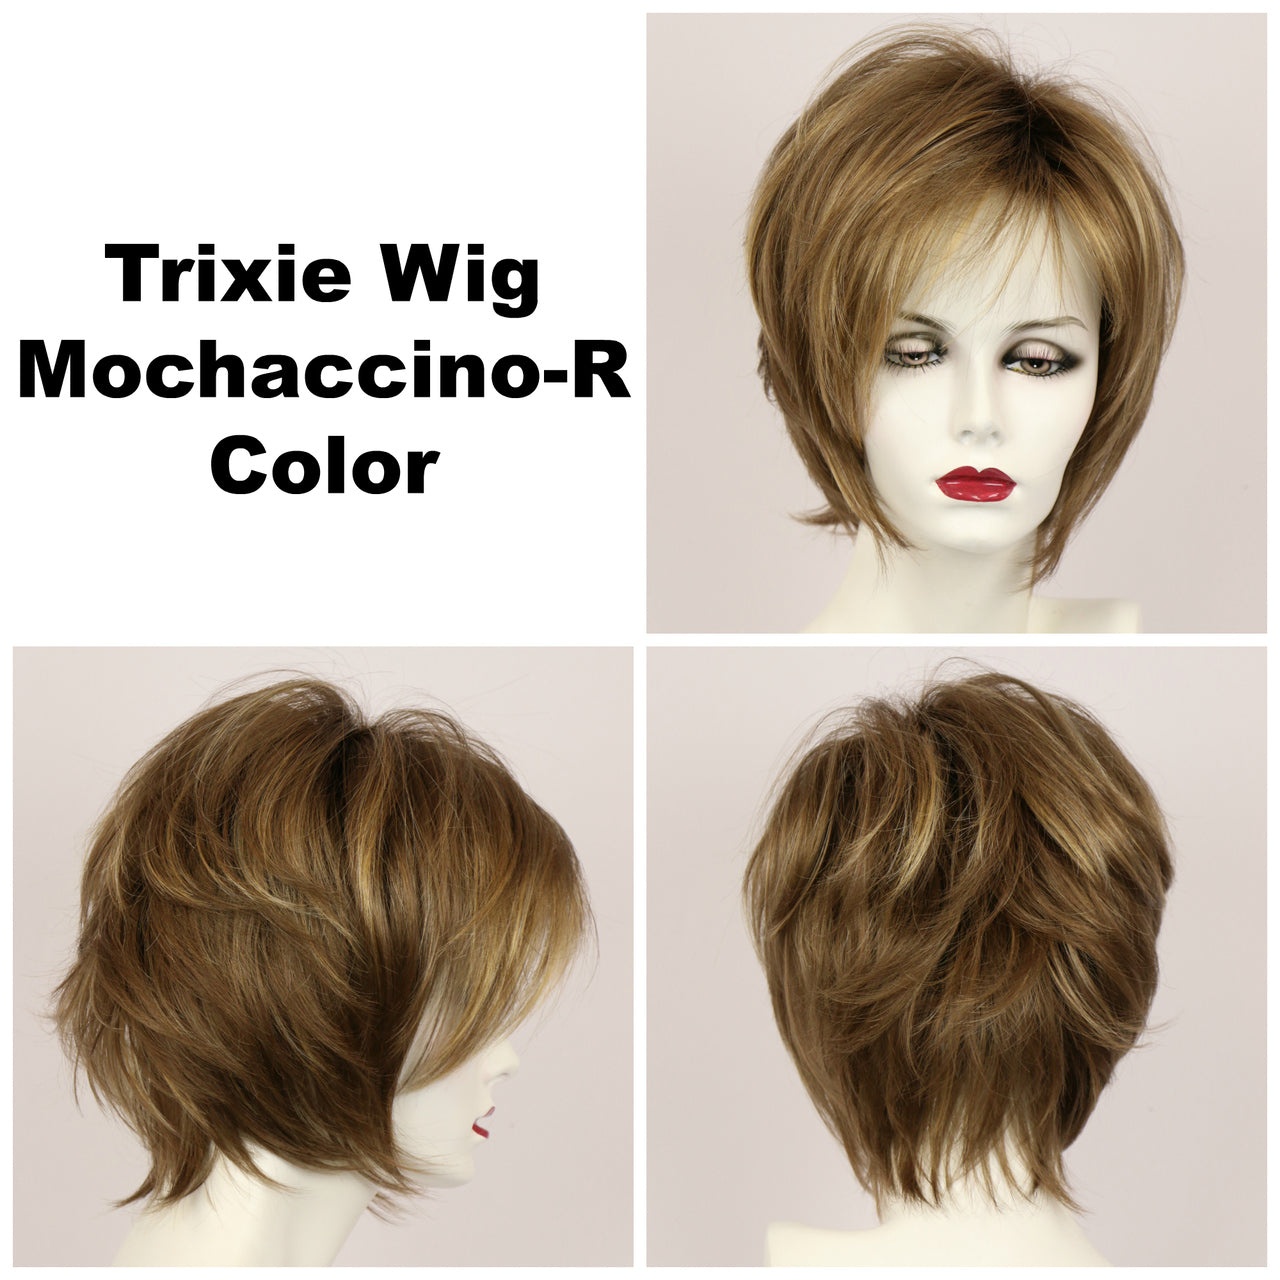 Mochaccino-R / Large Trixie w/ Roots / Medium Wig